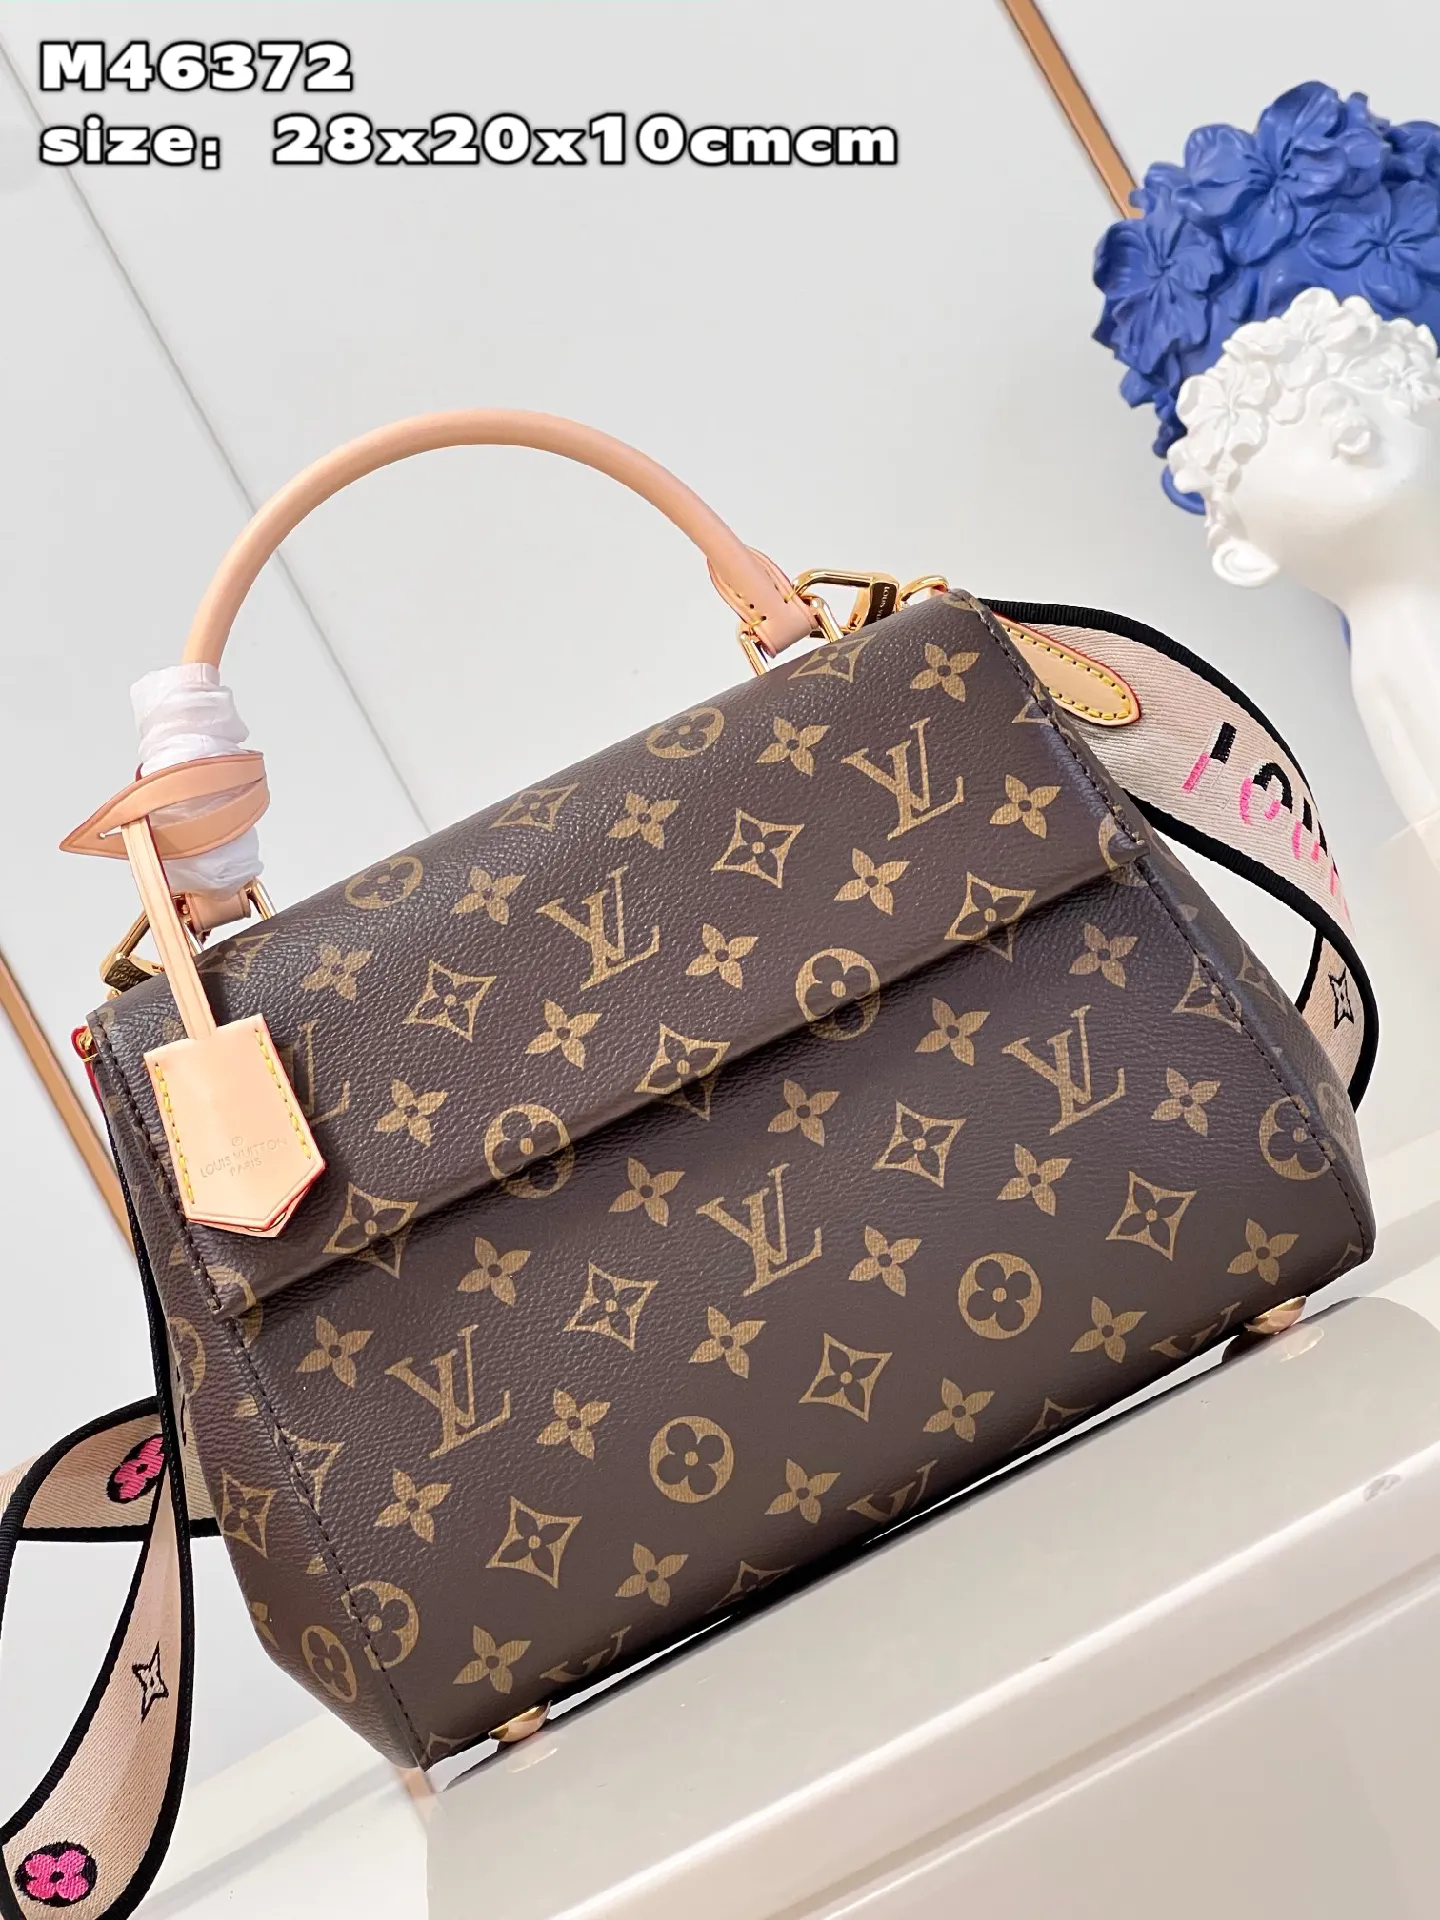 LV-Cluny BB purse, Gallery posted by GZ.Amy